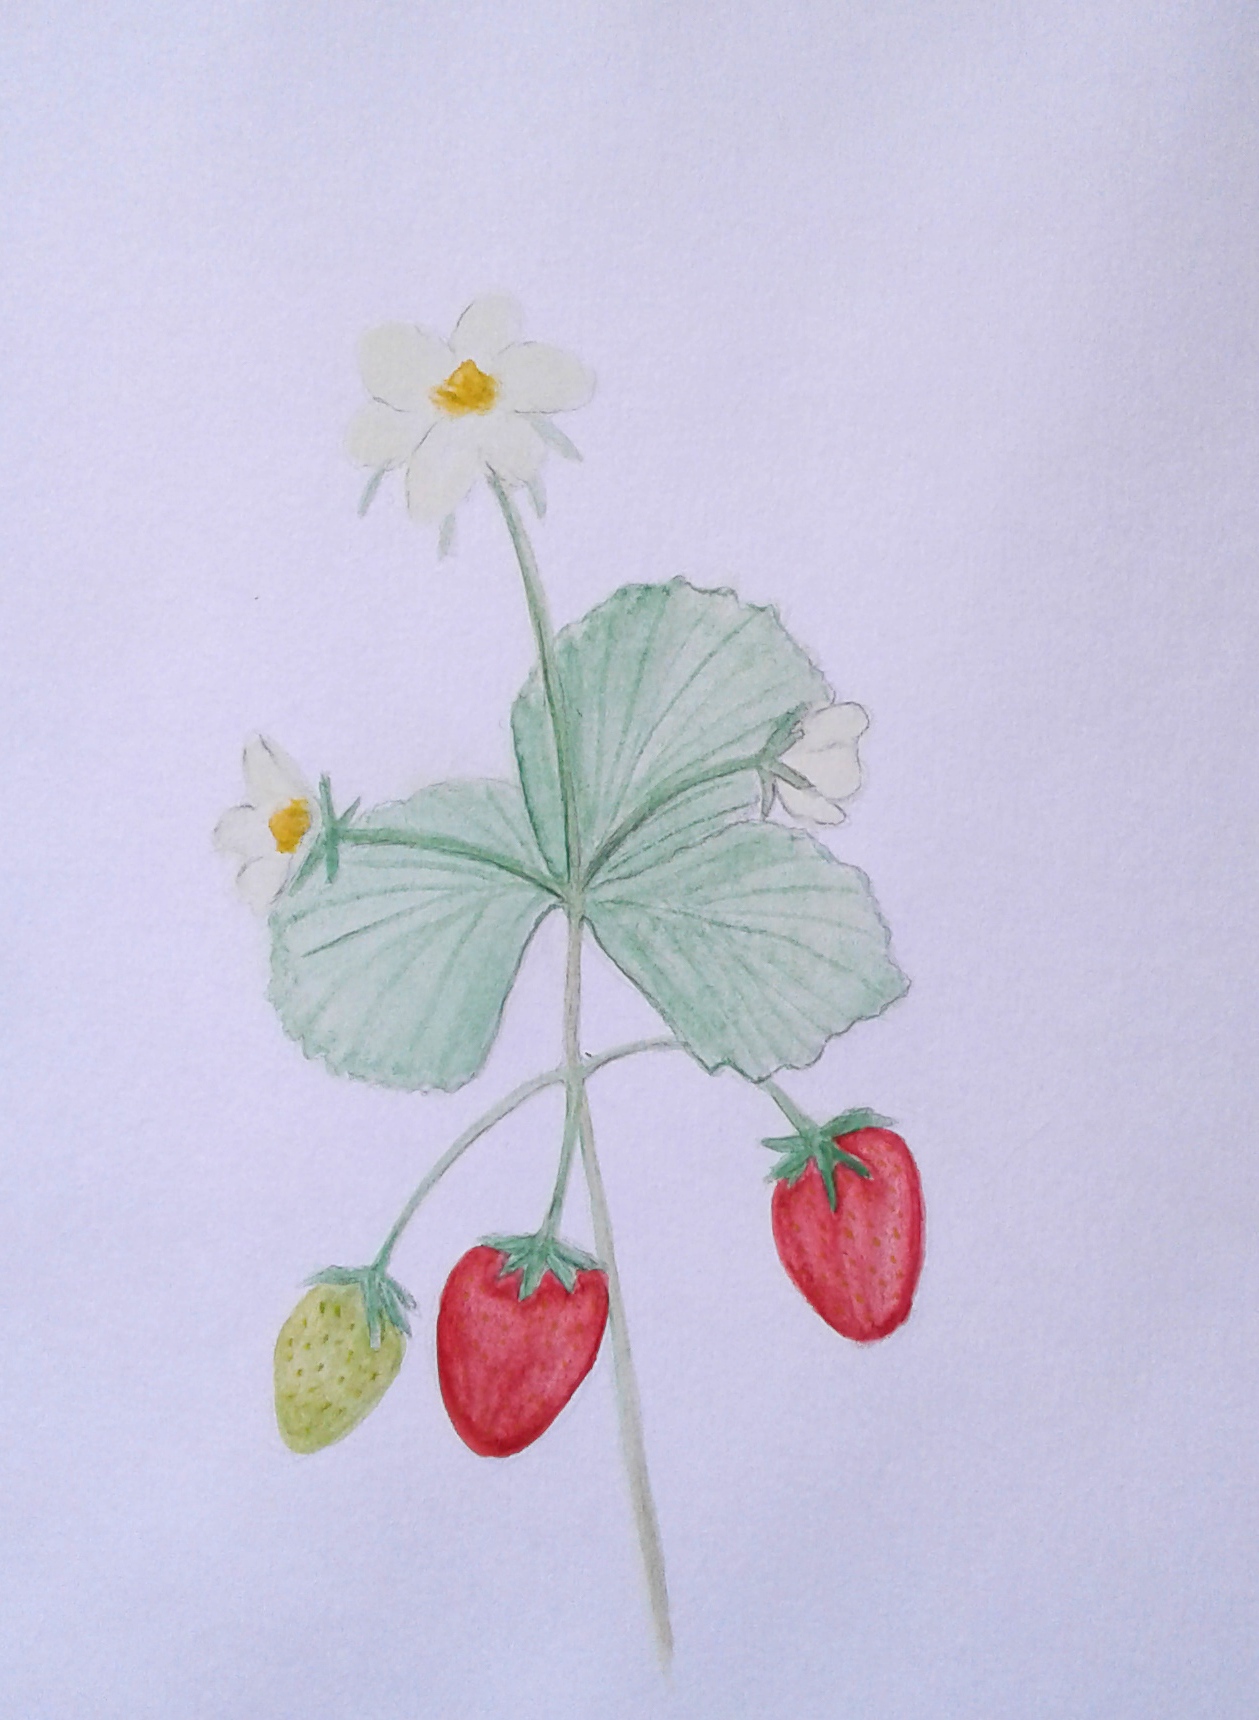 There is something wonderful about wild strawberries.